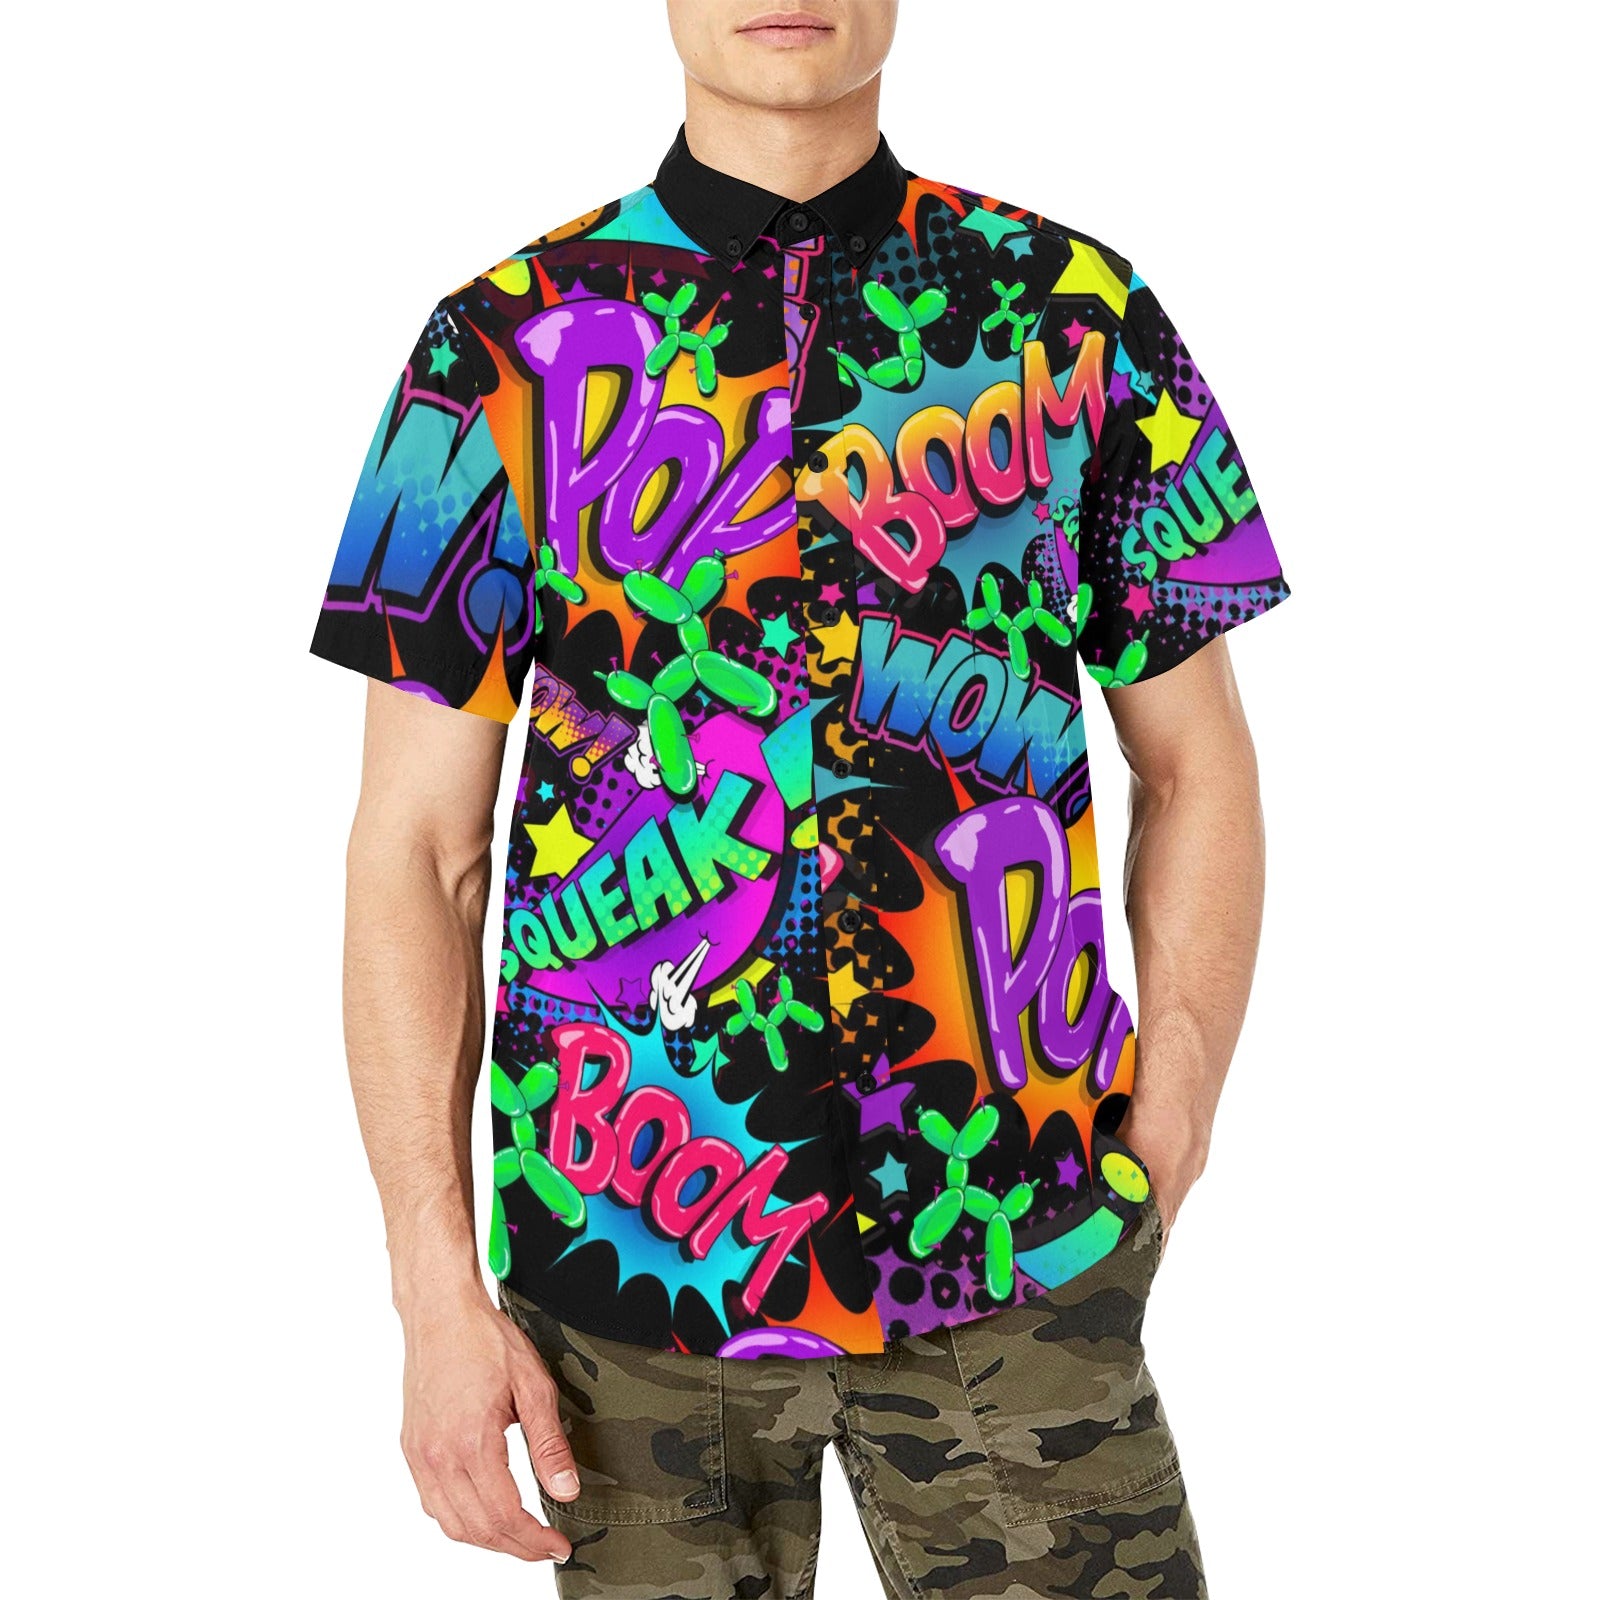 Colourful Balloon dog shirt for balloon twisting and face painting 